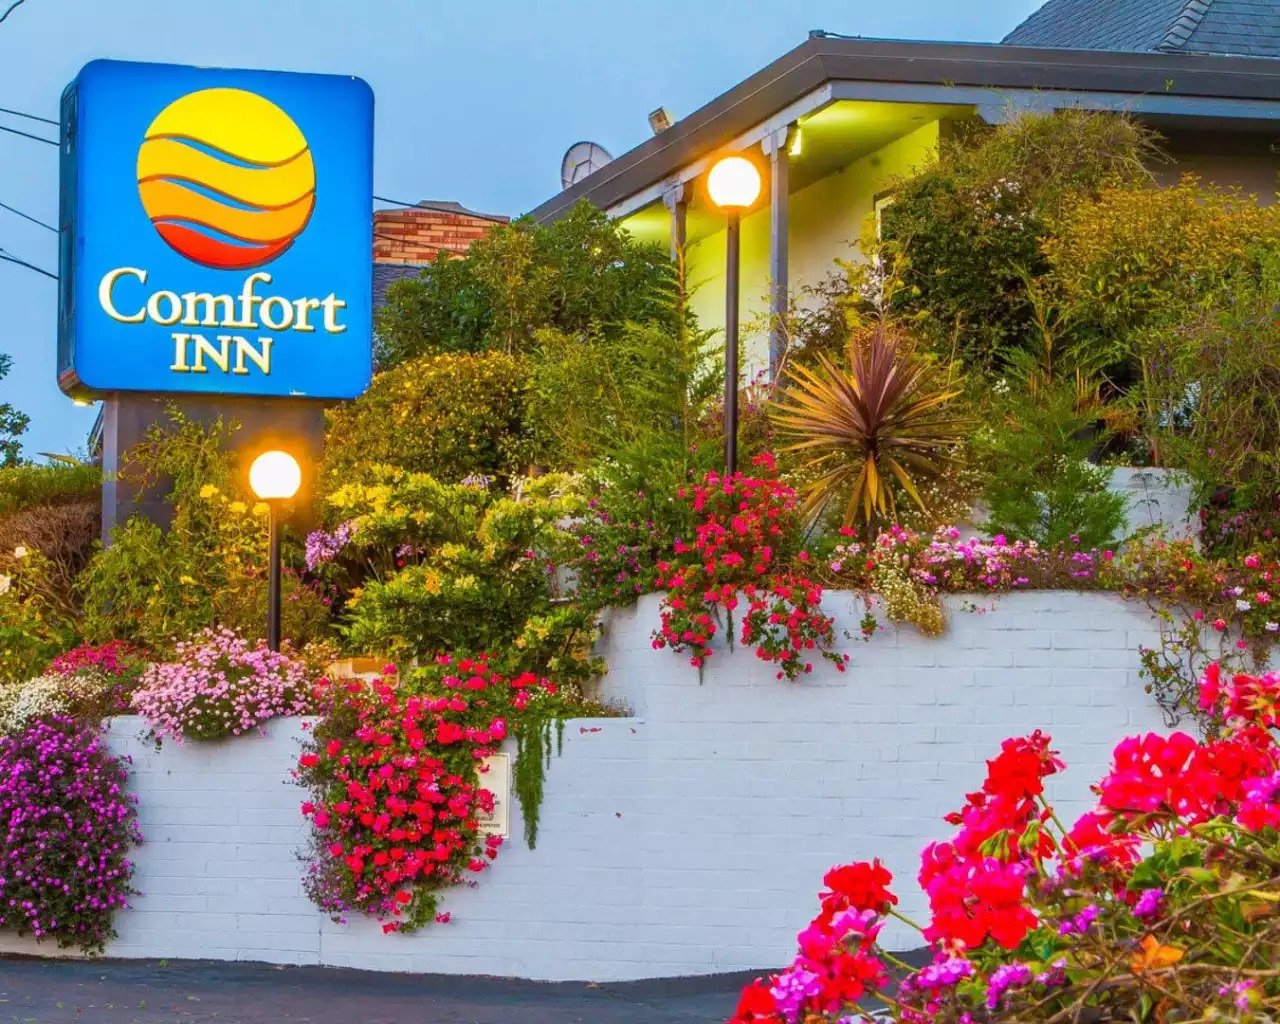 Hotels and other lodging in and near Monterey